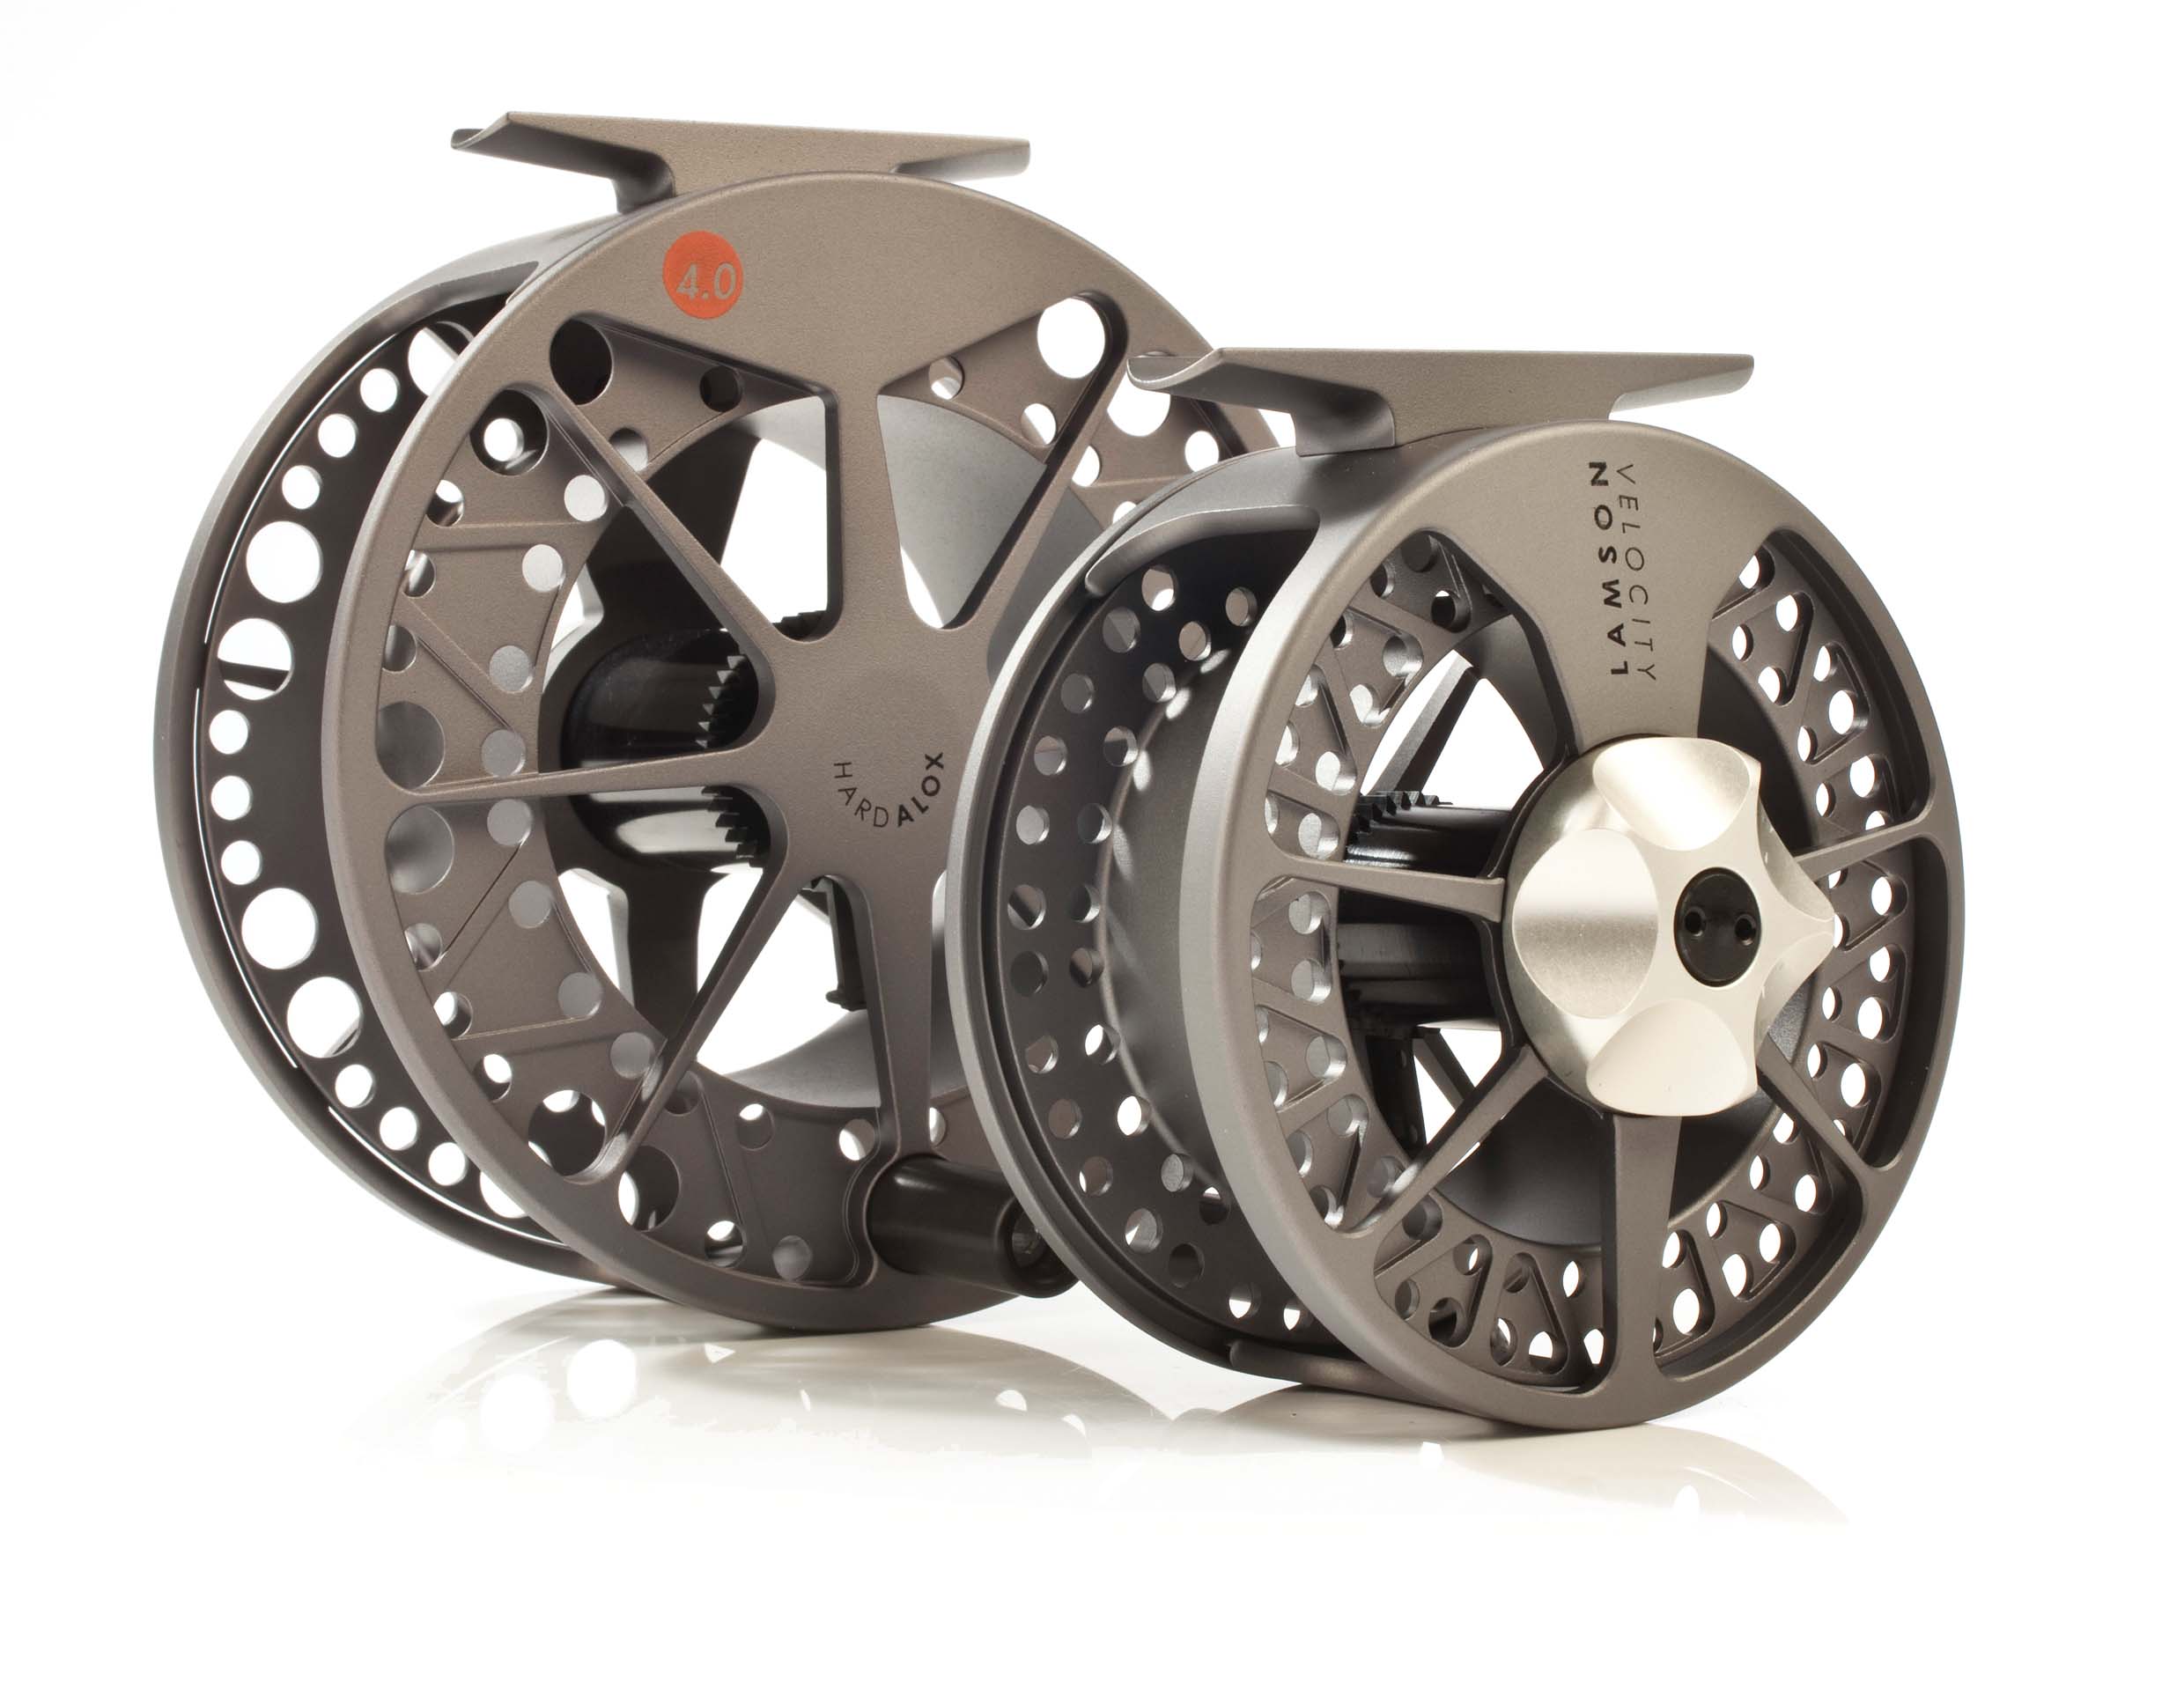 FS - Lamson Velocity V2 Reel with two extra spools, three lines, two Lamson  reel pouches